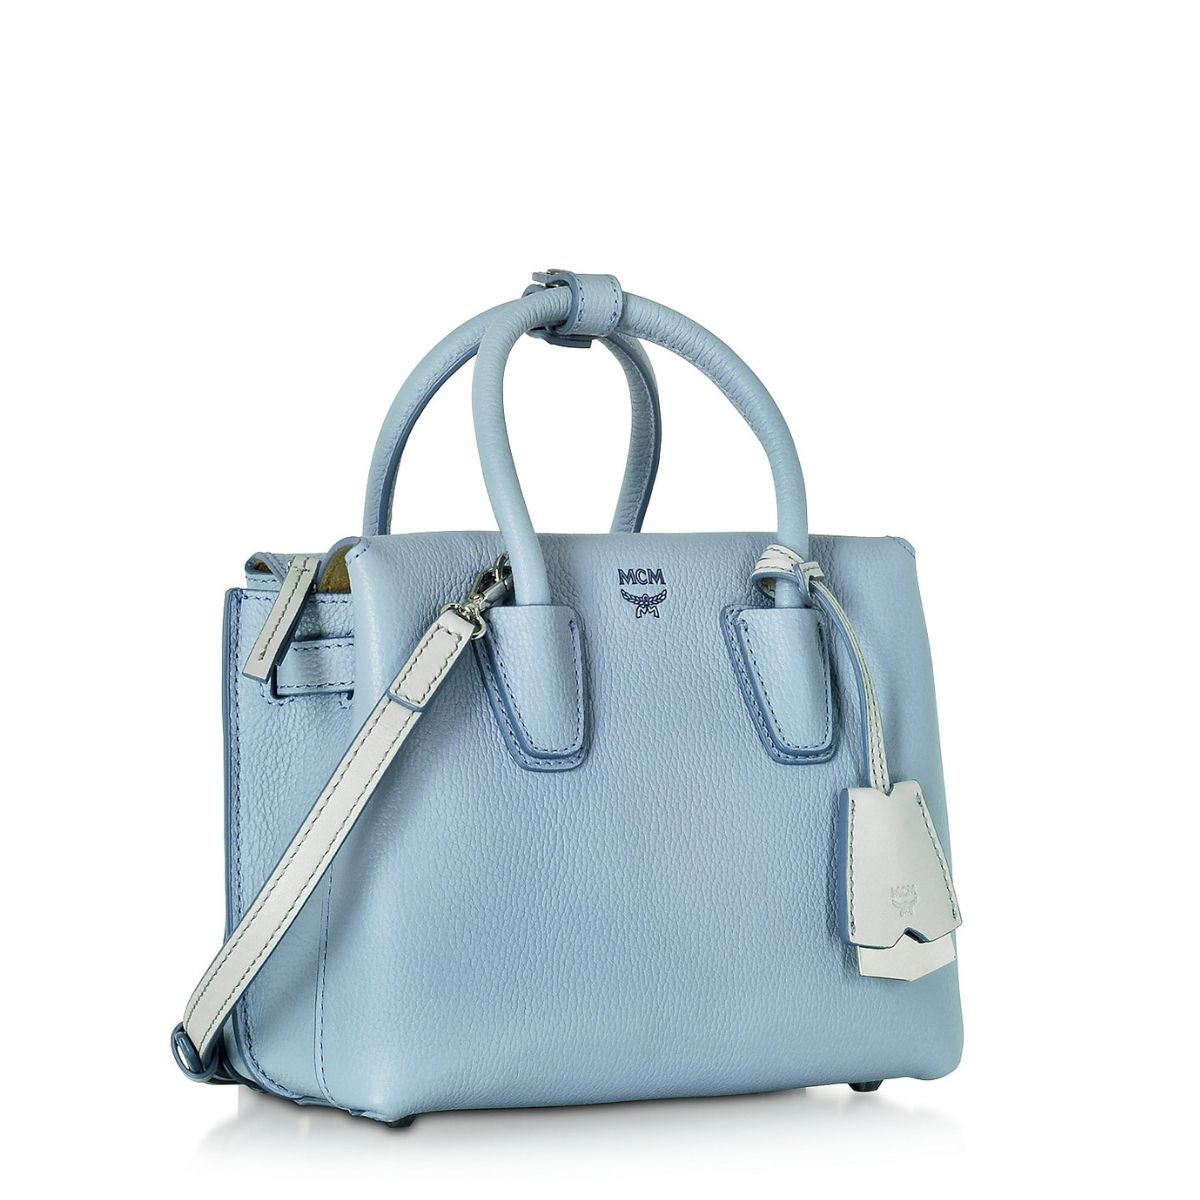 MCM Blue Leather Milla Park Avenue Satchel at 1stDibs  nordstrom mcm bags,  mcm authenticity card, mcm milla tote